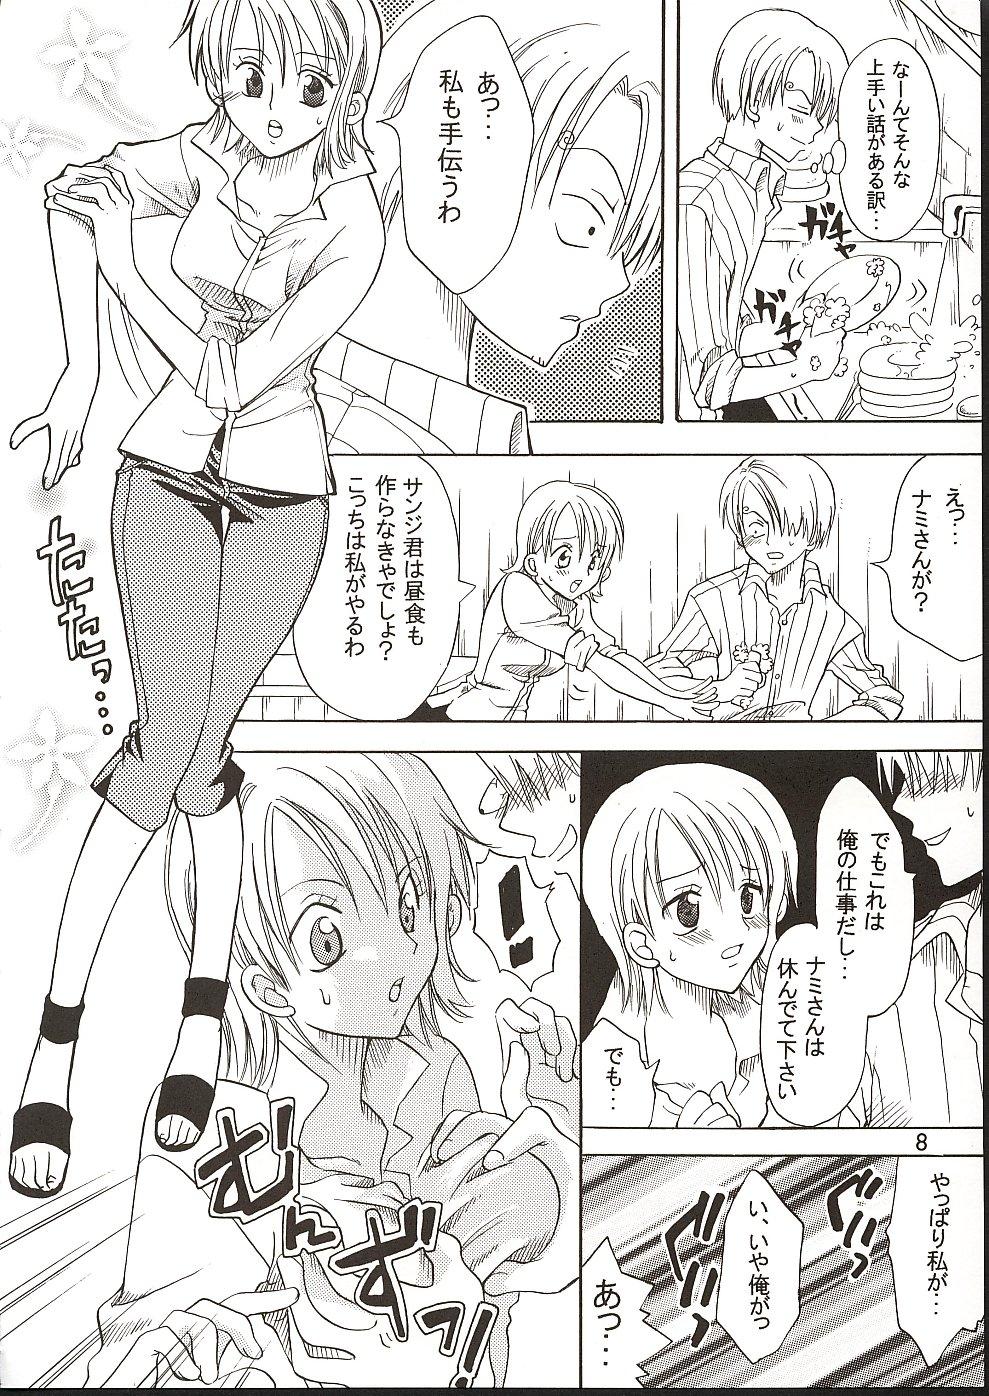 Perverted Shiawase Punch! 3 - One piece Teensex - Page 7